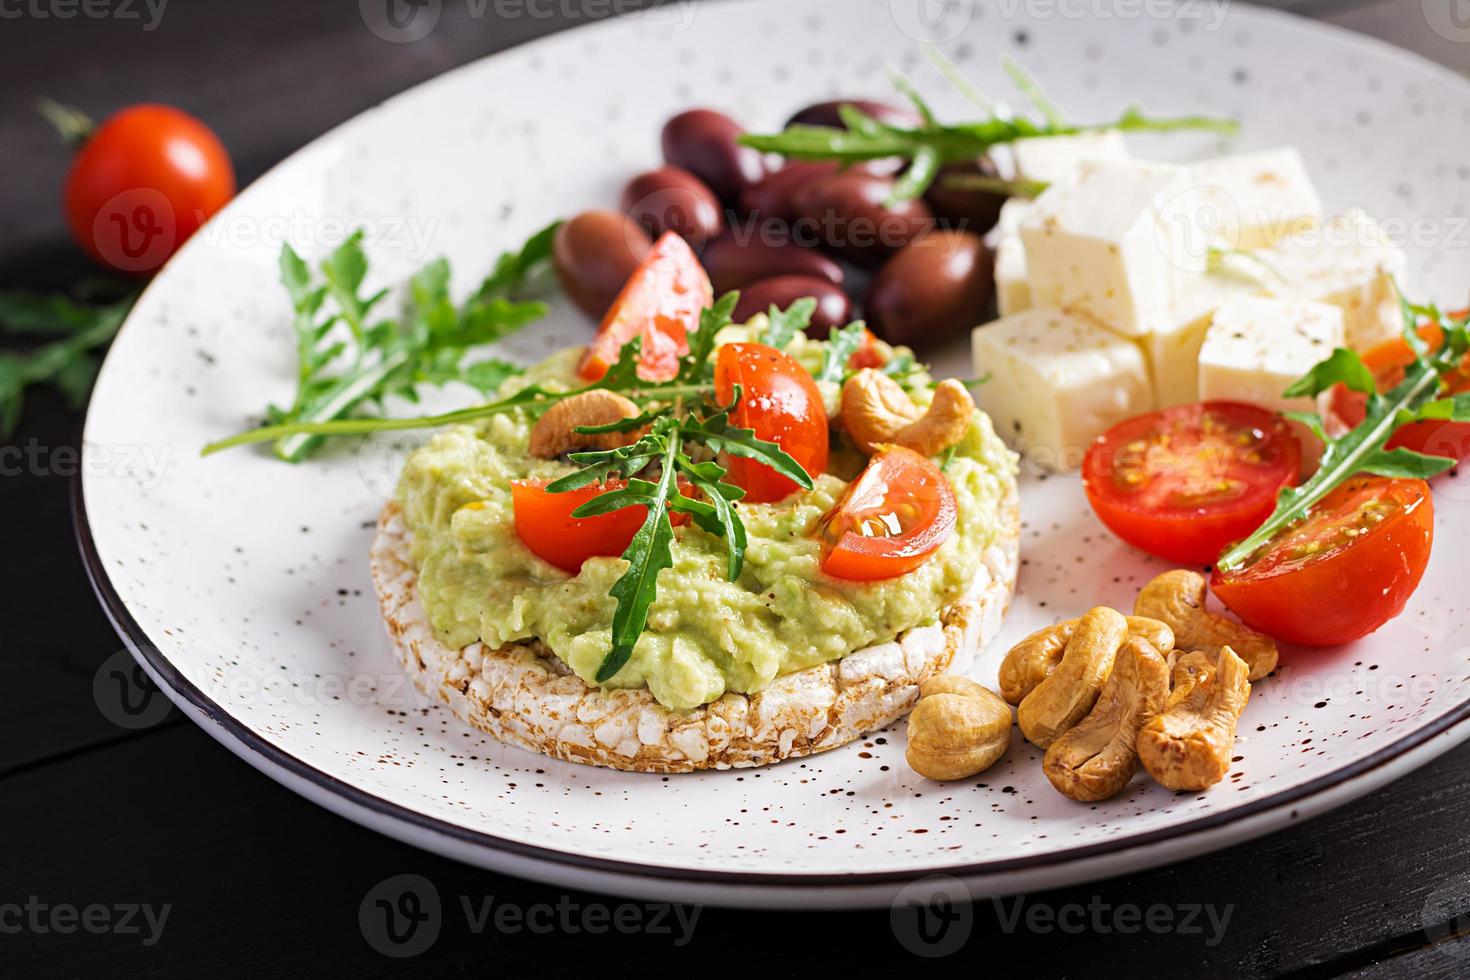 Healthy avocado toasts for breakfast or lunch,  guacamole avocado, kalamata olives, tomatoes, cashew nuts and  feta cheese. Vegetarian sandwiches photo